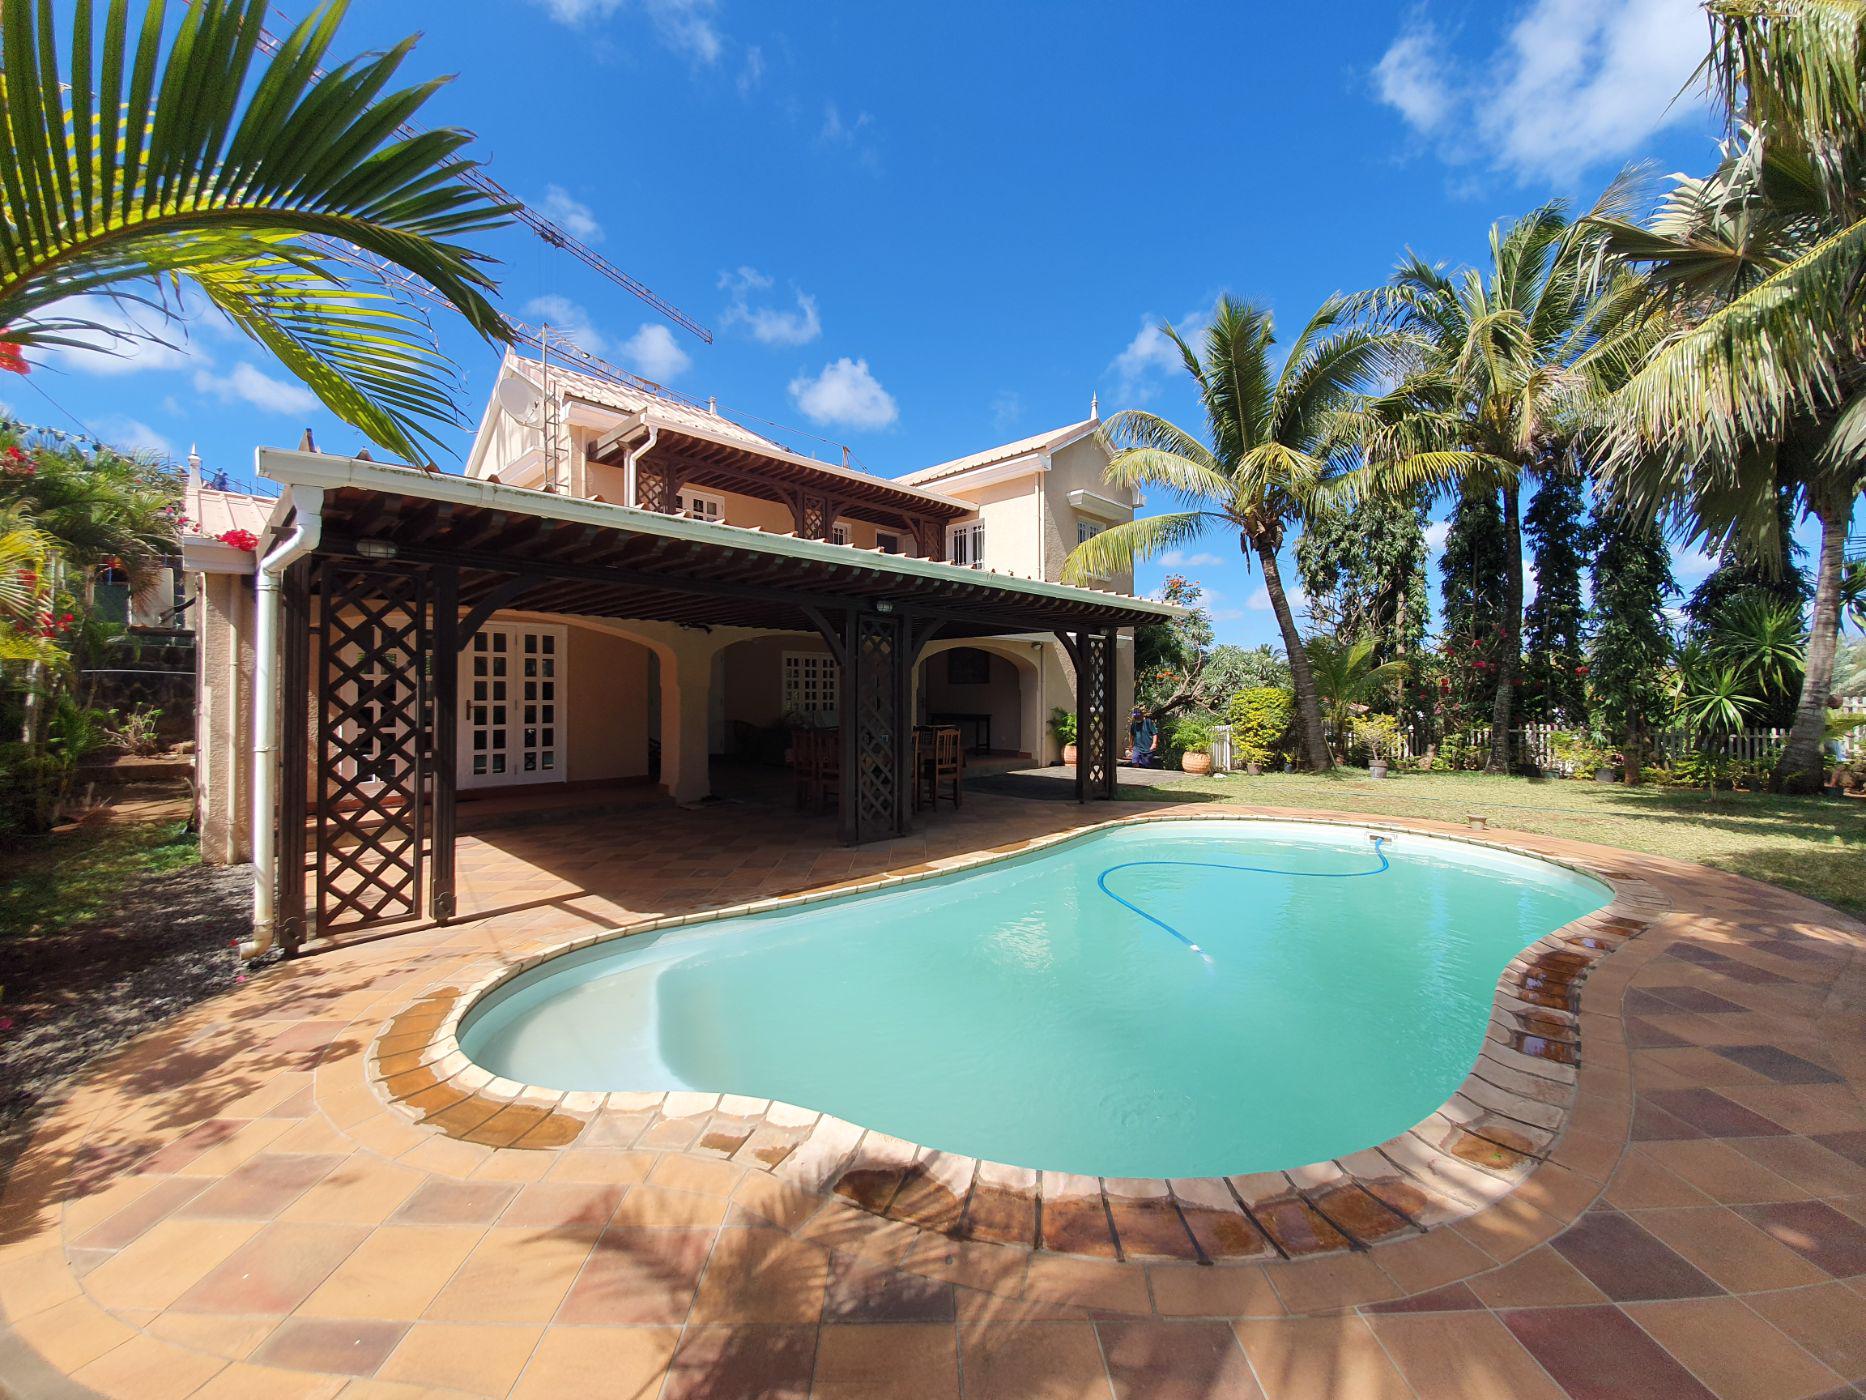 4 bedroom house for sale in Pointe aux Canonniers (Mauritius)